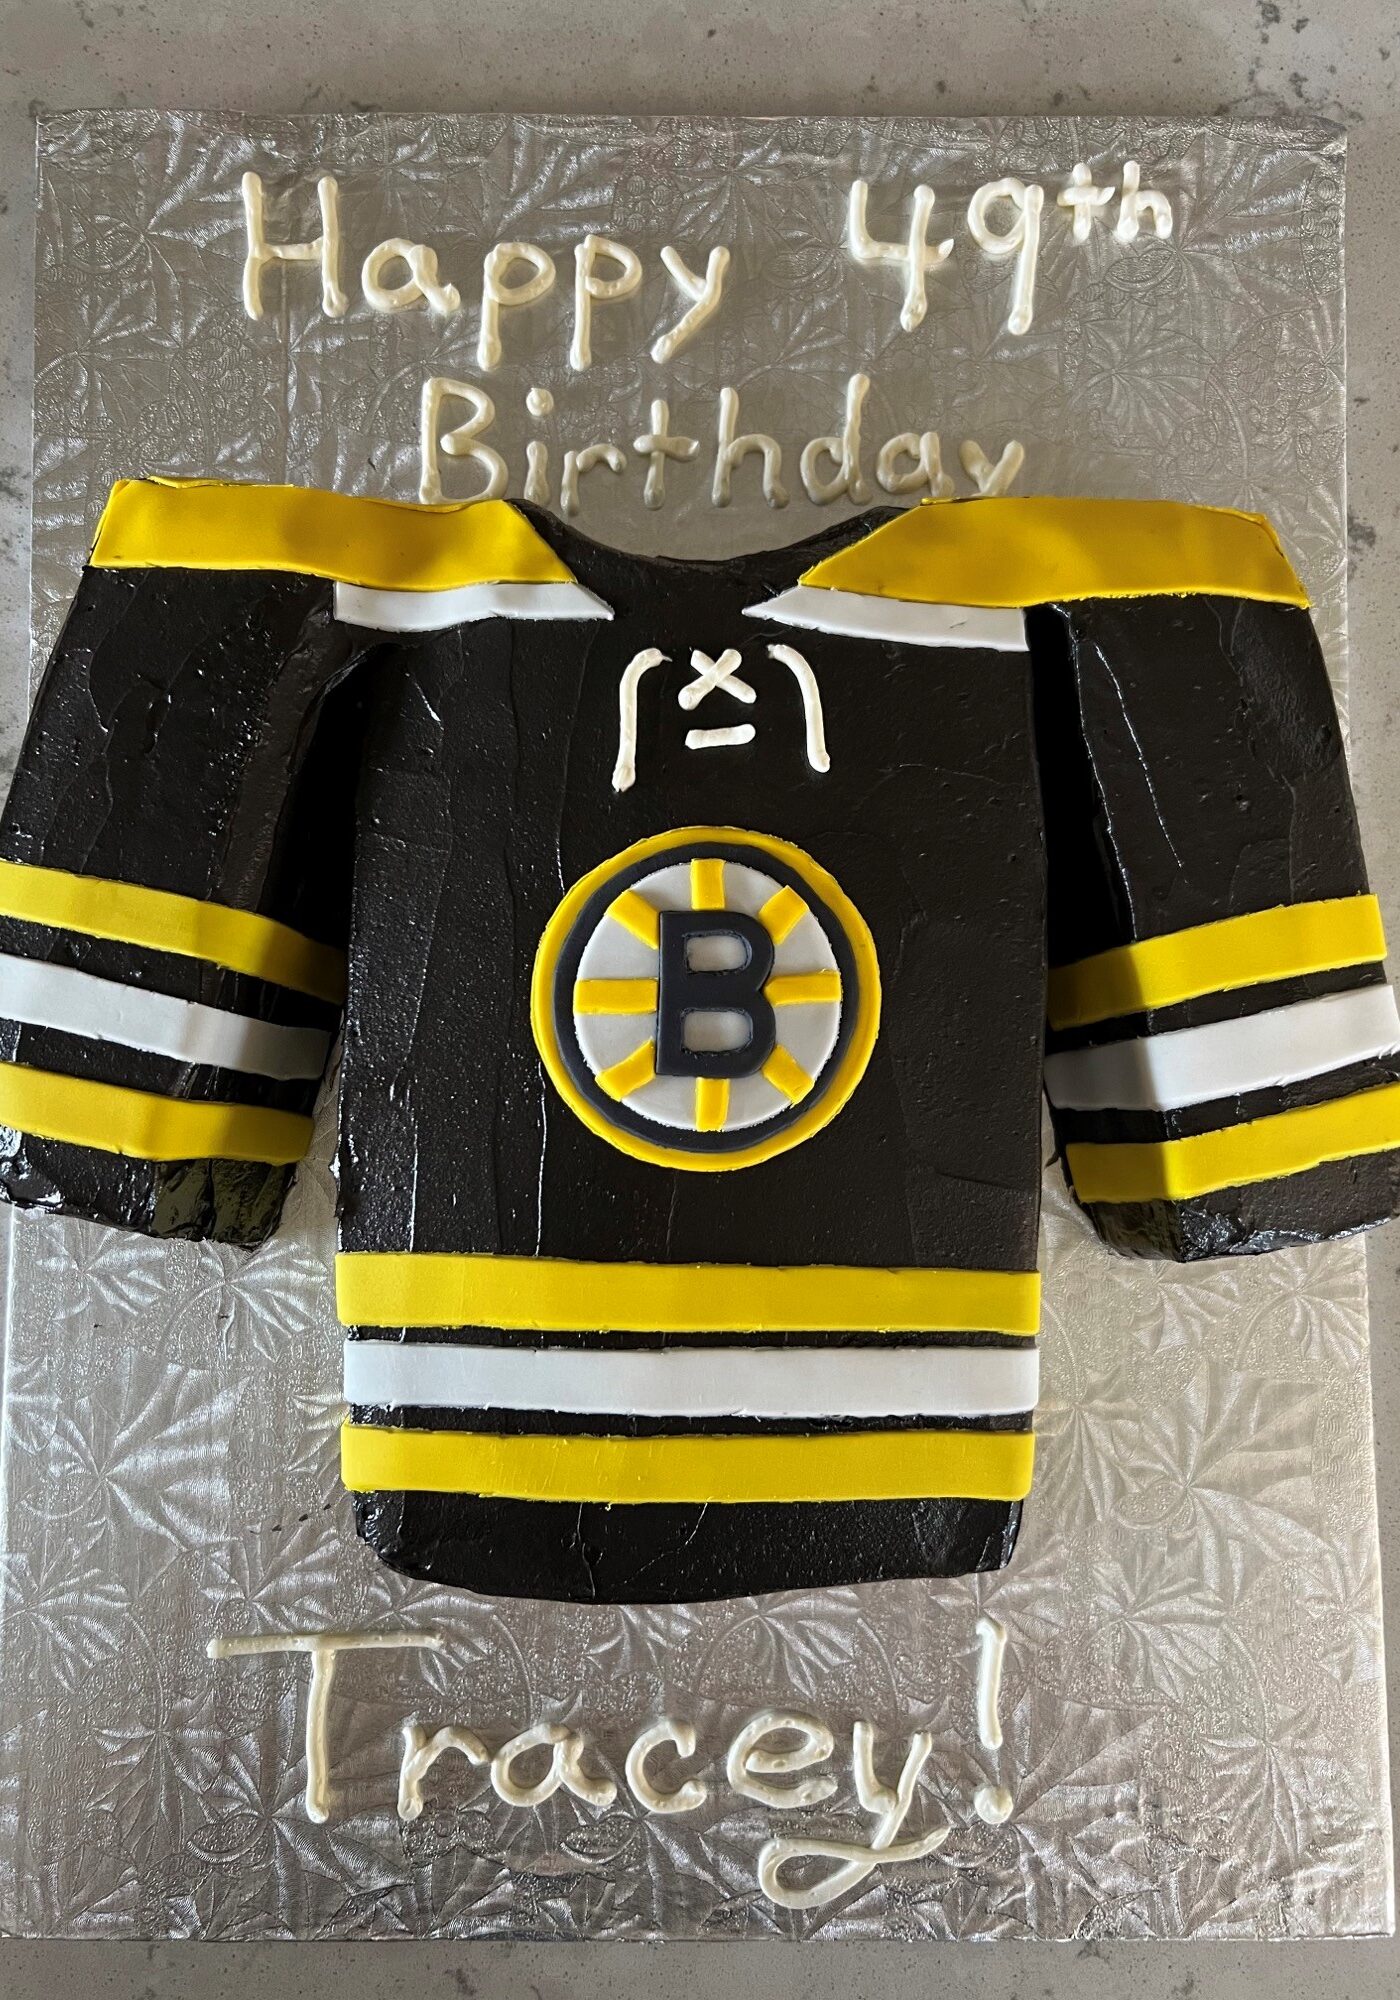 Auntie Tracey's Boston Bruins Bday Cake with writing top view 1 (May 9 2022)